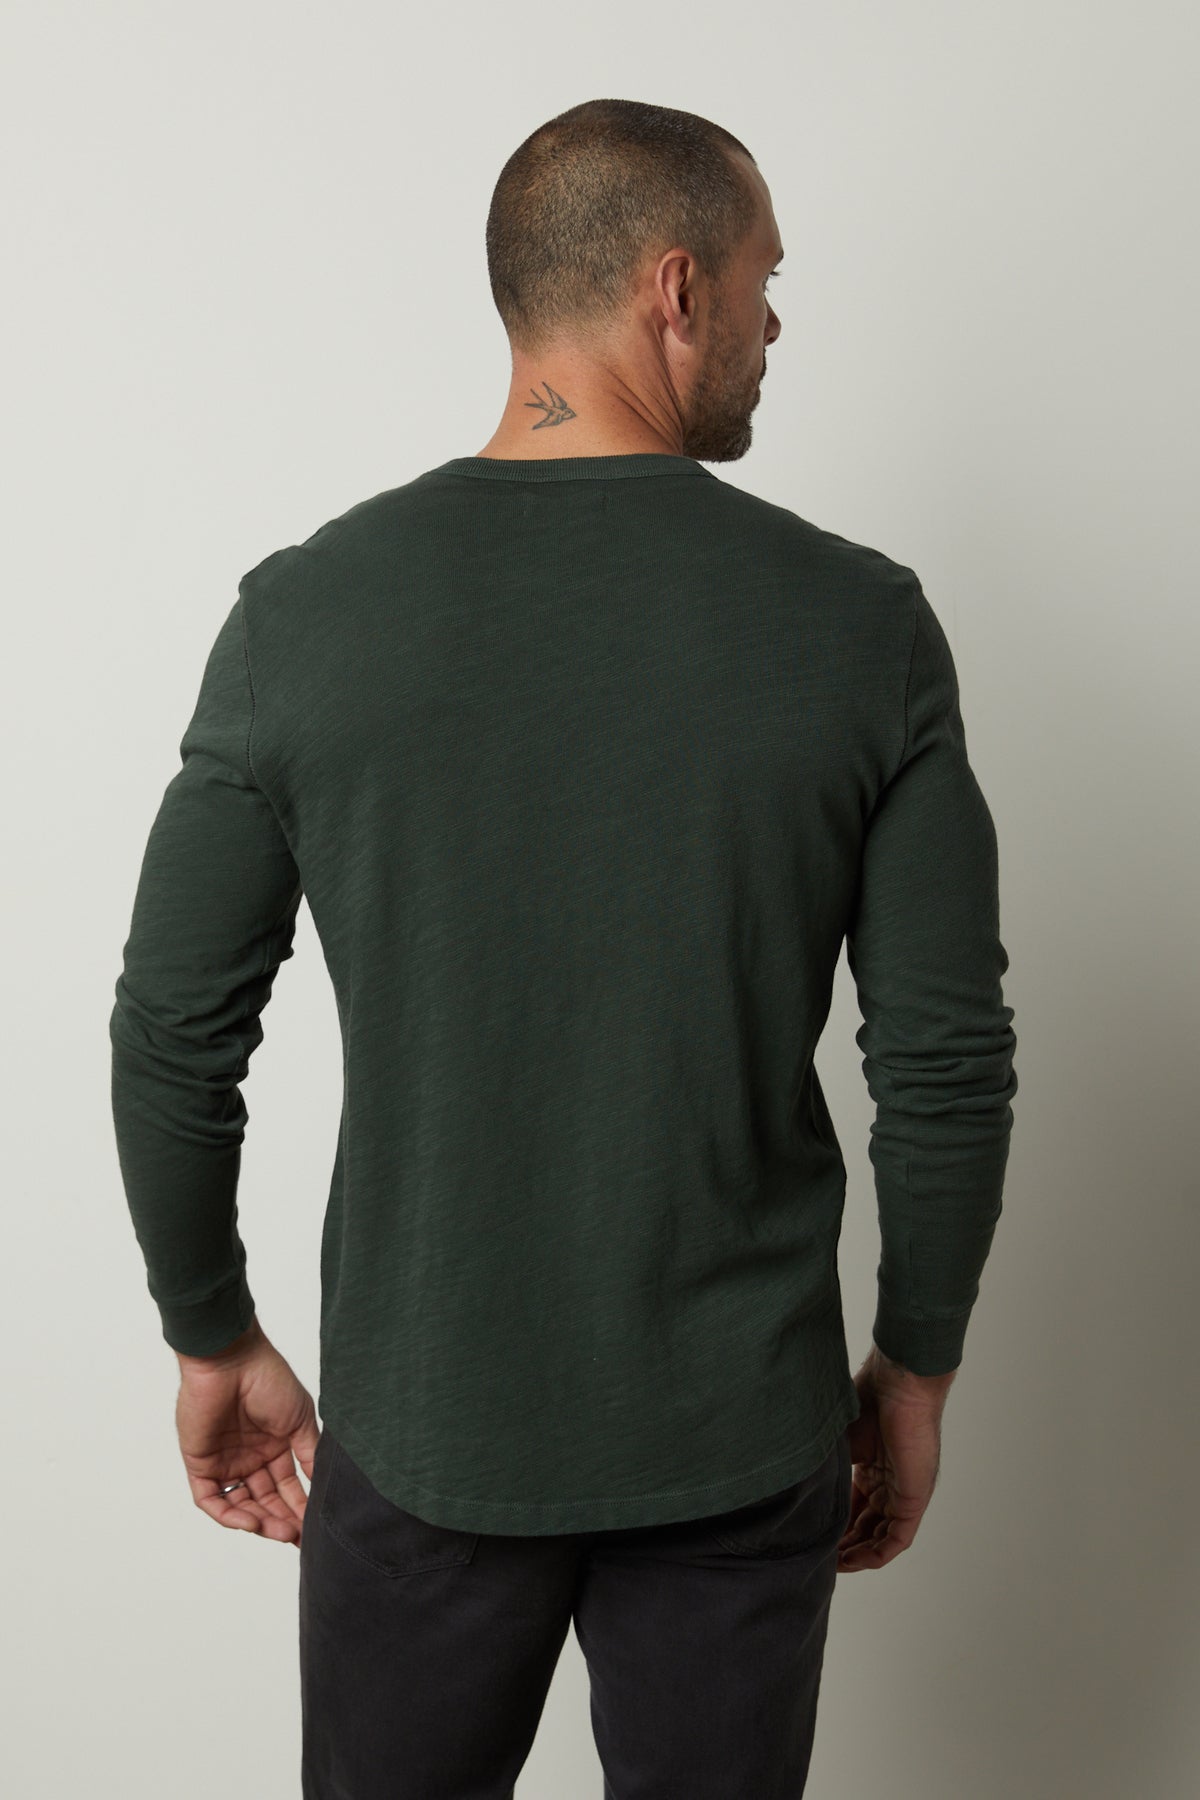   The back view of a man wearing a PALMER CREW NECK TEE made by Velvet by Graham & Spencer, made of soft cotton slub knit, with ribbed neckline and cuffs. 